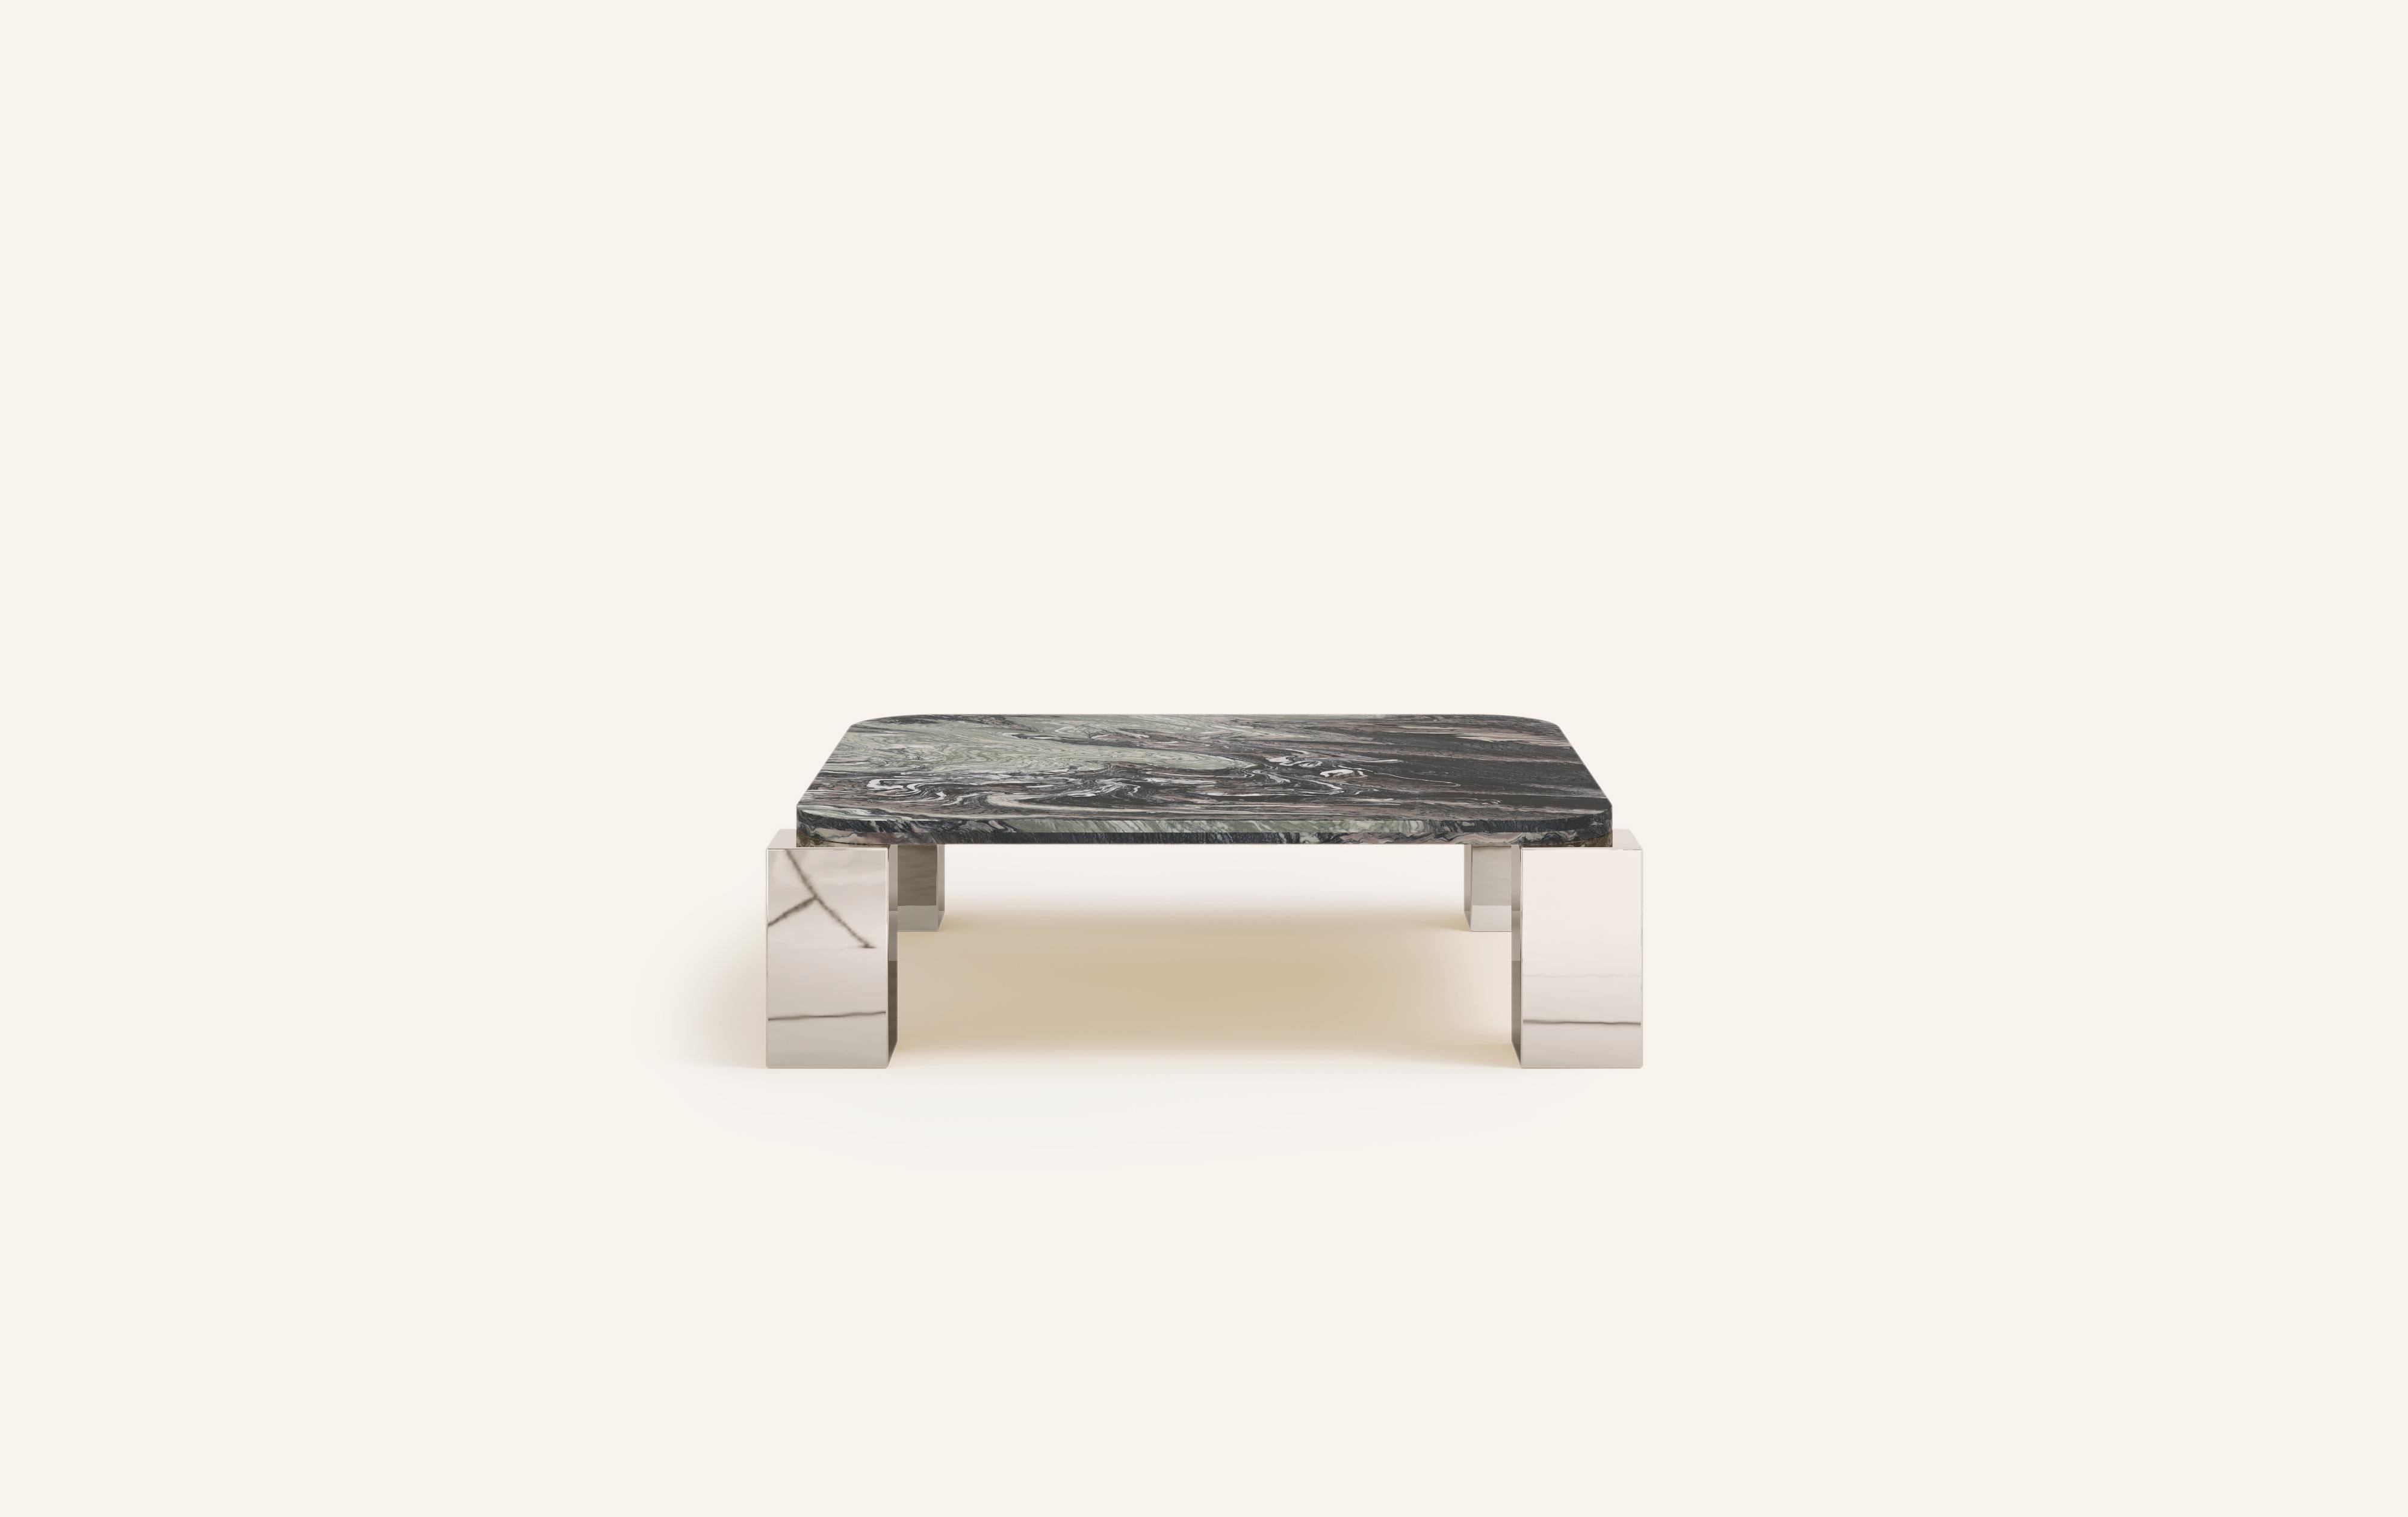 MONOLITHIC FORMS SOFTENED BY GENTLE EDGES. WITH ITS BOLD MARBLE PATTERNS CUBO IS AS VERSATILE AS IT IS STRIKING.

DIMENSIONS:
50”L x 50”W x 14”H: 
- 48”L x 48”W x 1.5” THICK TABLETOP WITH WITH 6